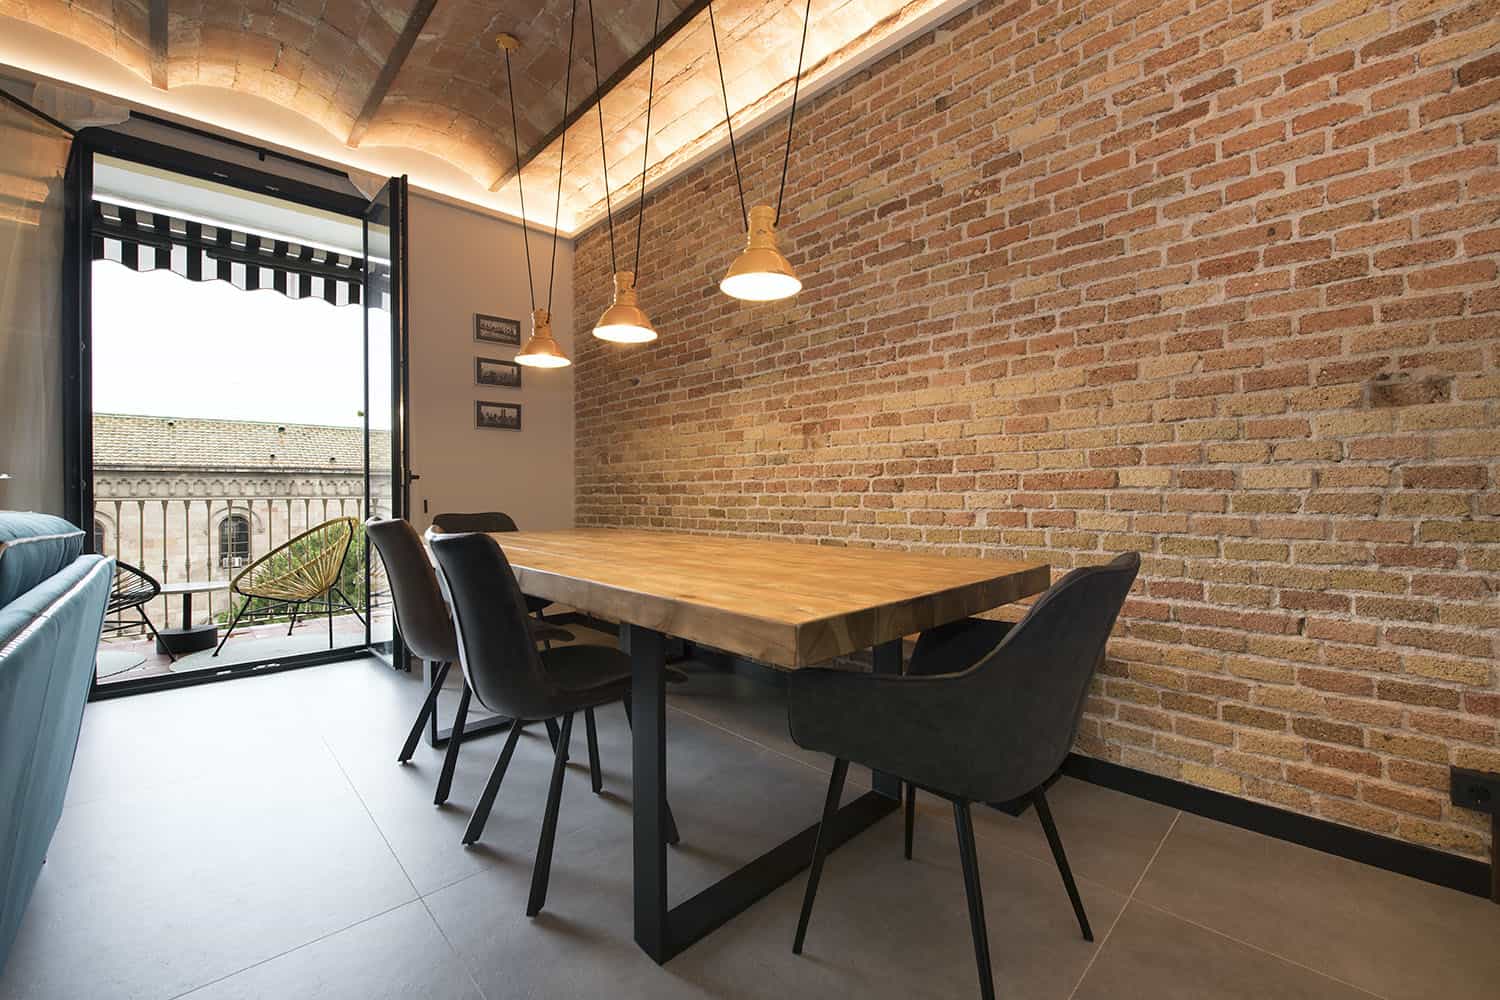 06 The dining space is industrial, with a brick wall, a wooden table and black chairs plus pendant lamps